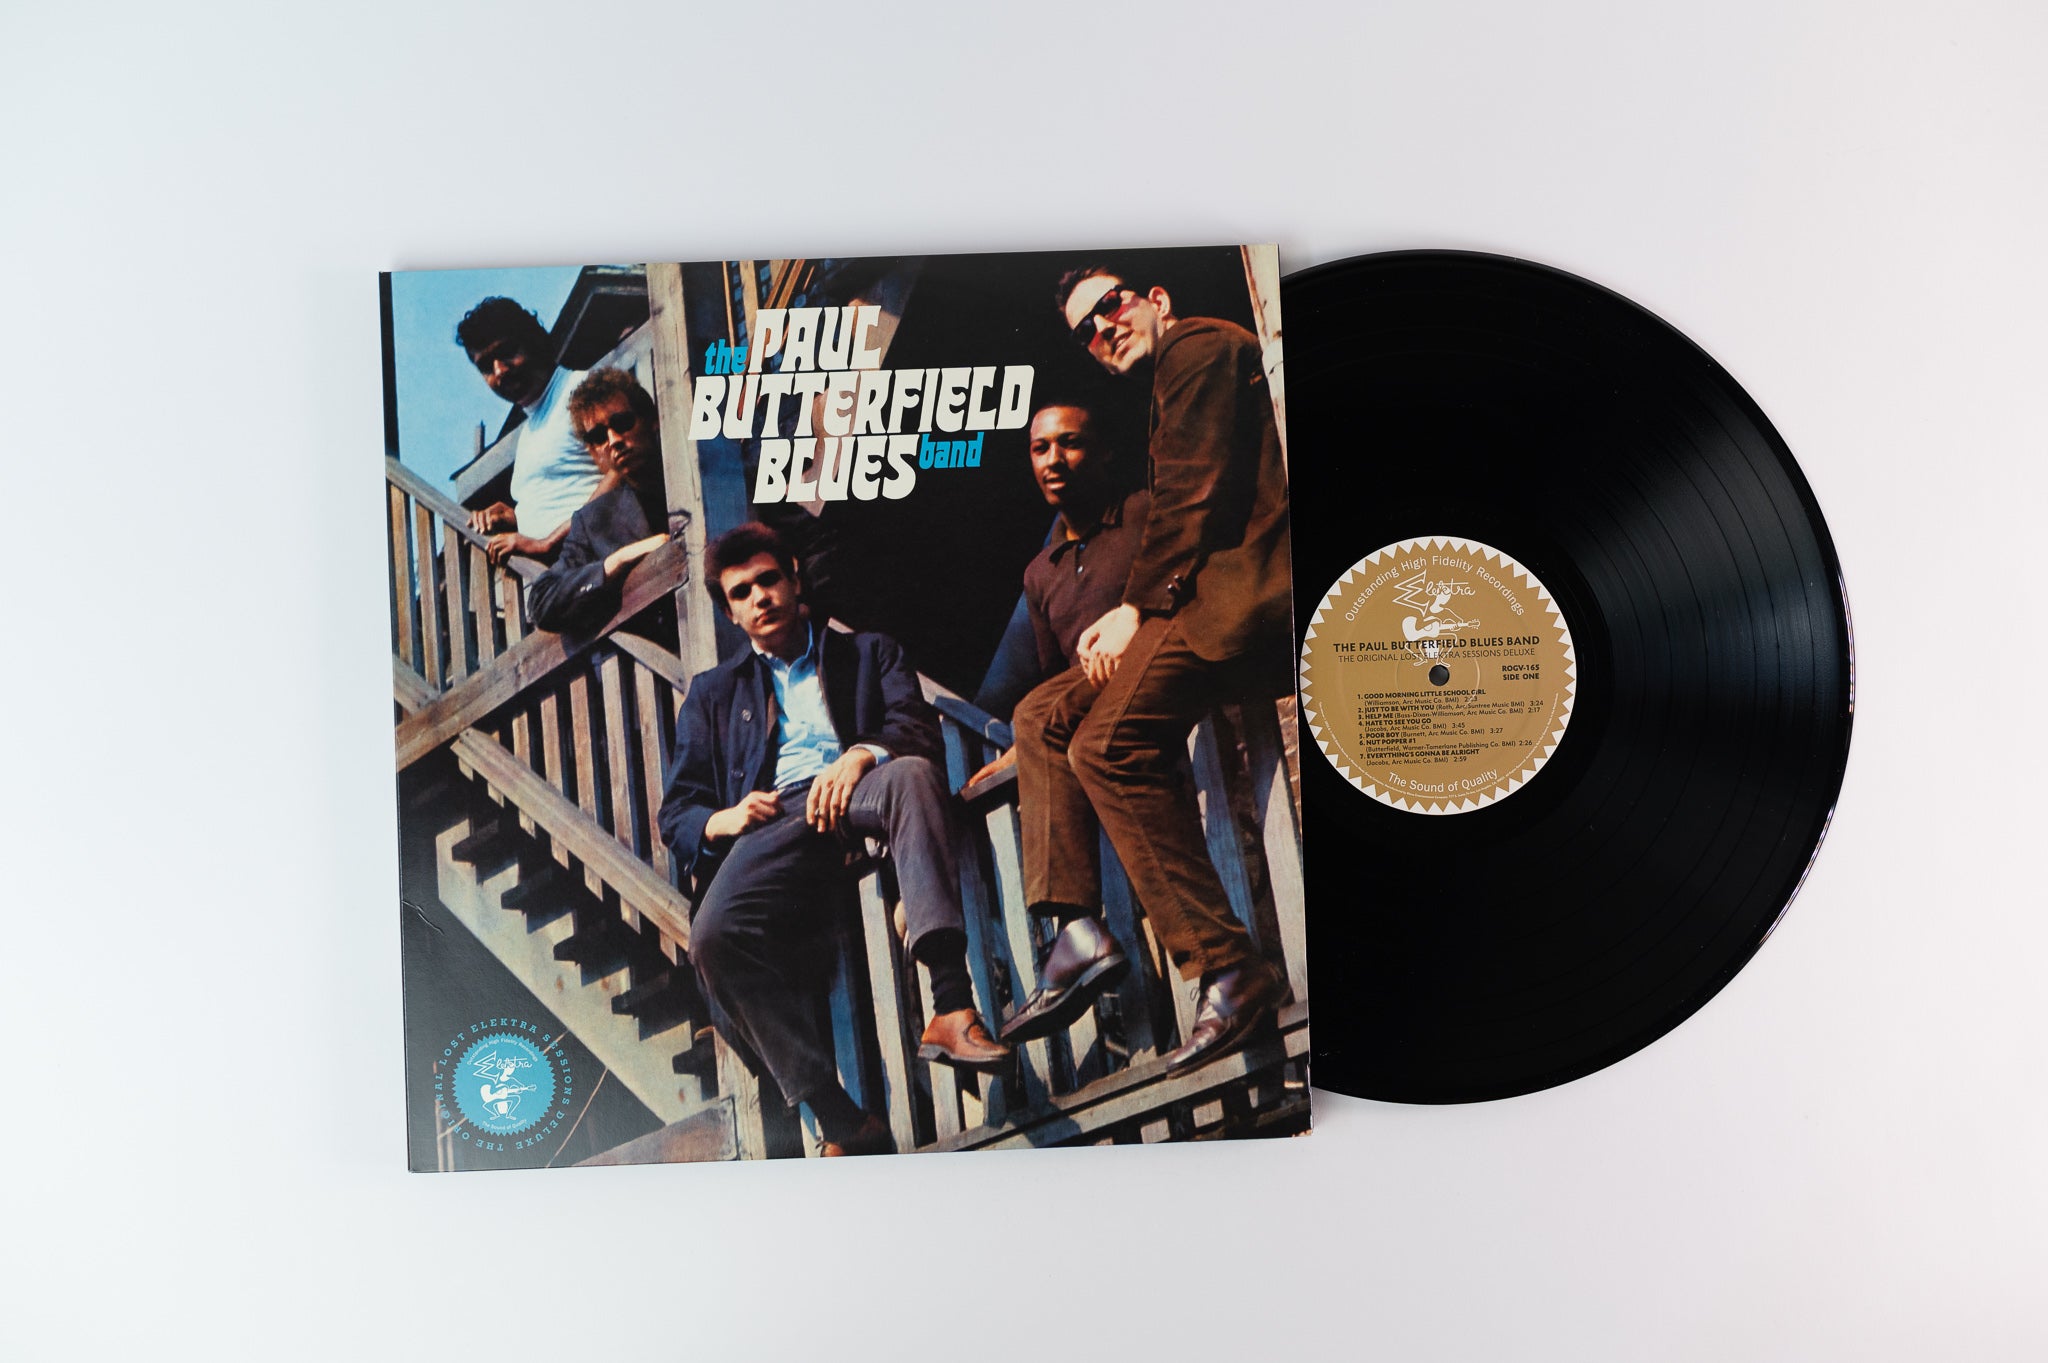 The Paul Butterfield Blues Band - The Original Lost Elektra Sessions Deluxe Edition Reissue